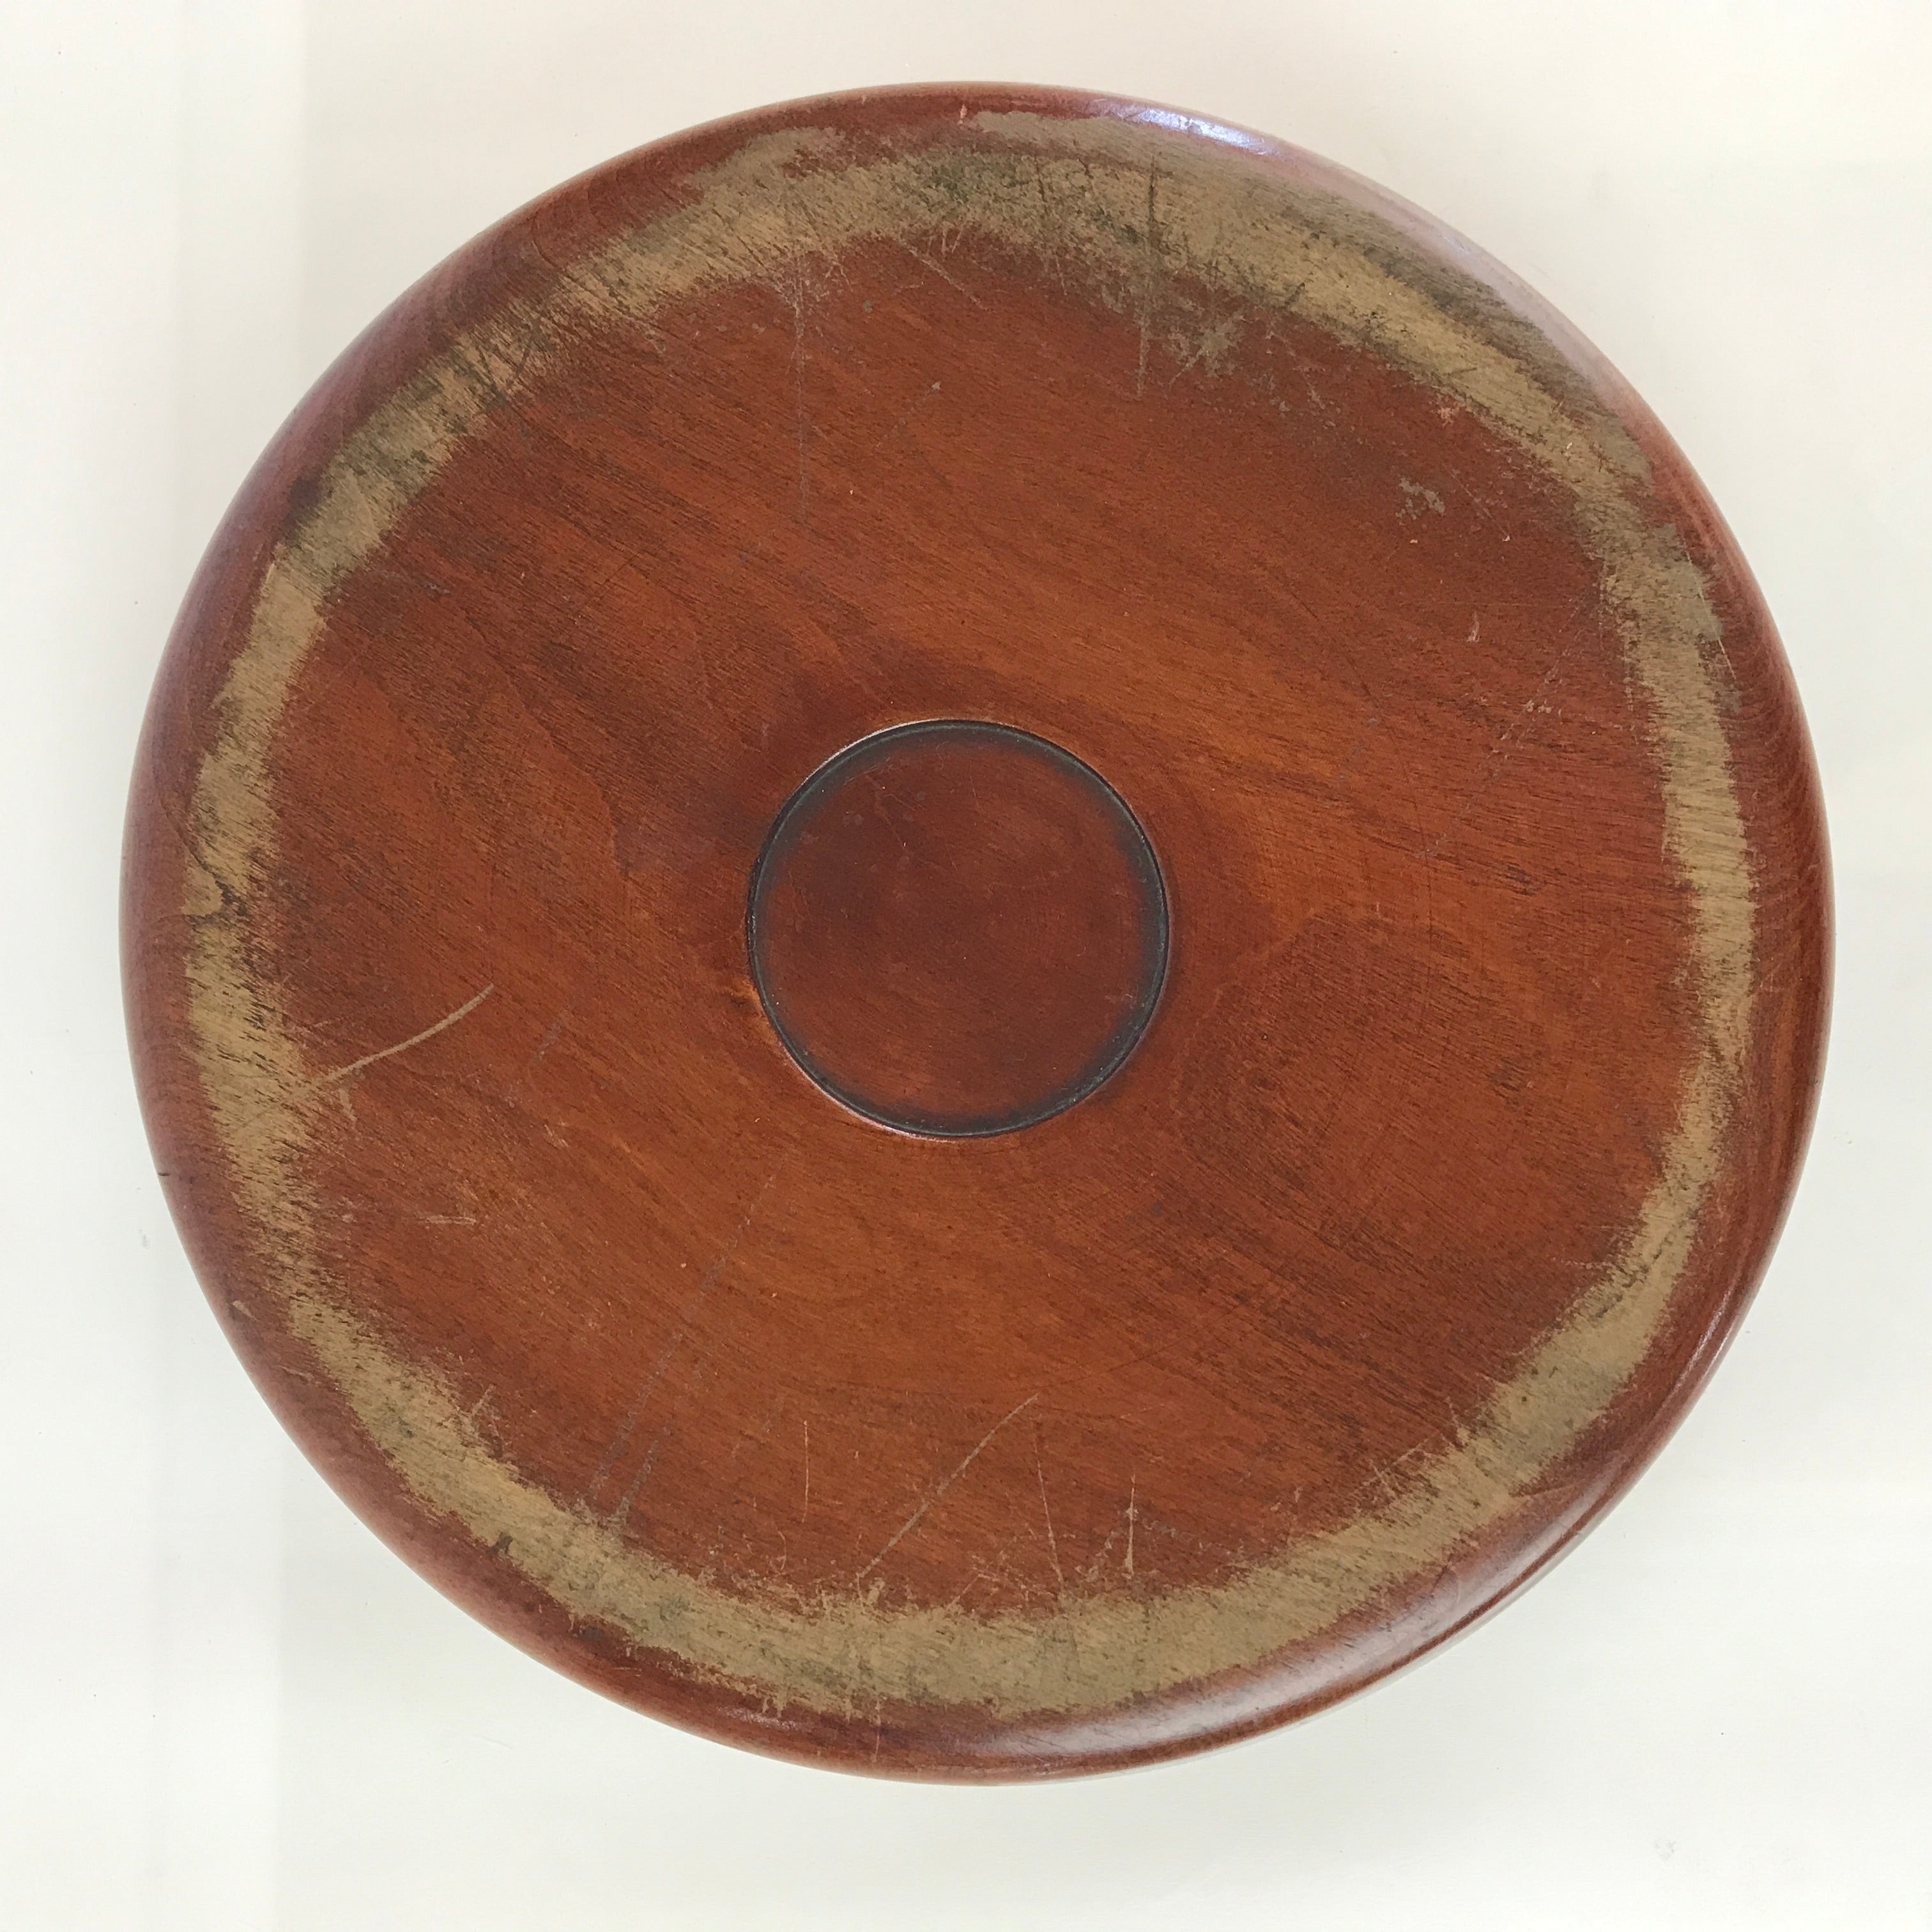 Japanese Wooden Lacquered Tray Obon Vtg Round Natural Wood Brown UR808